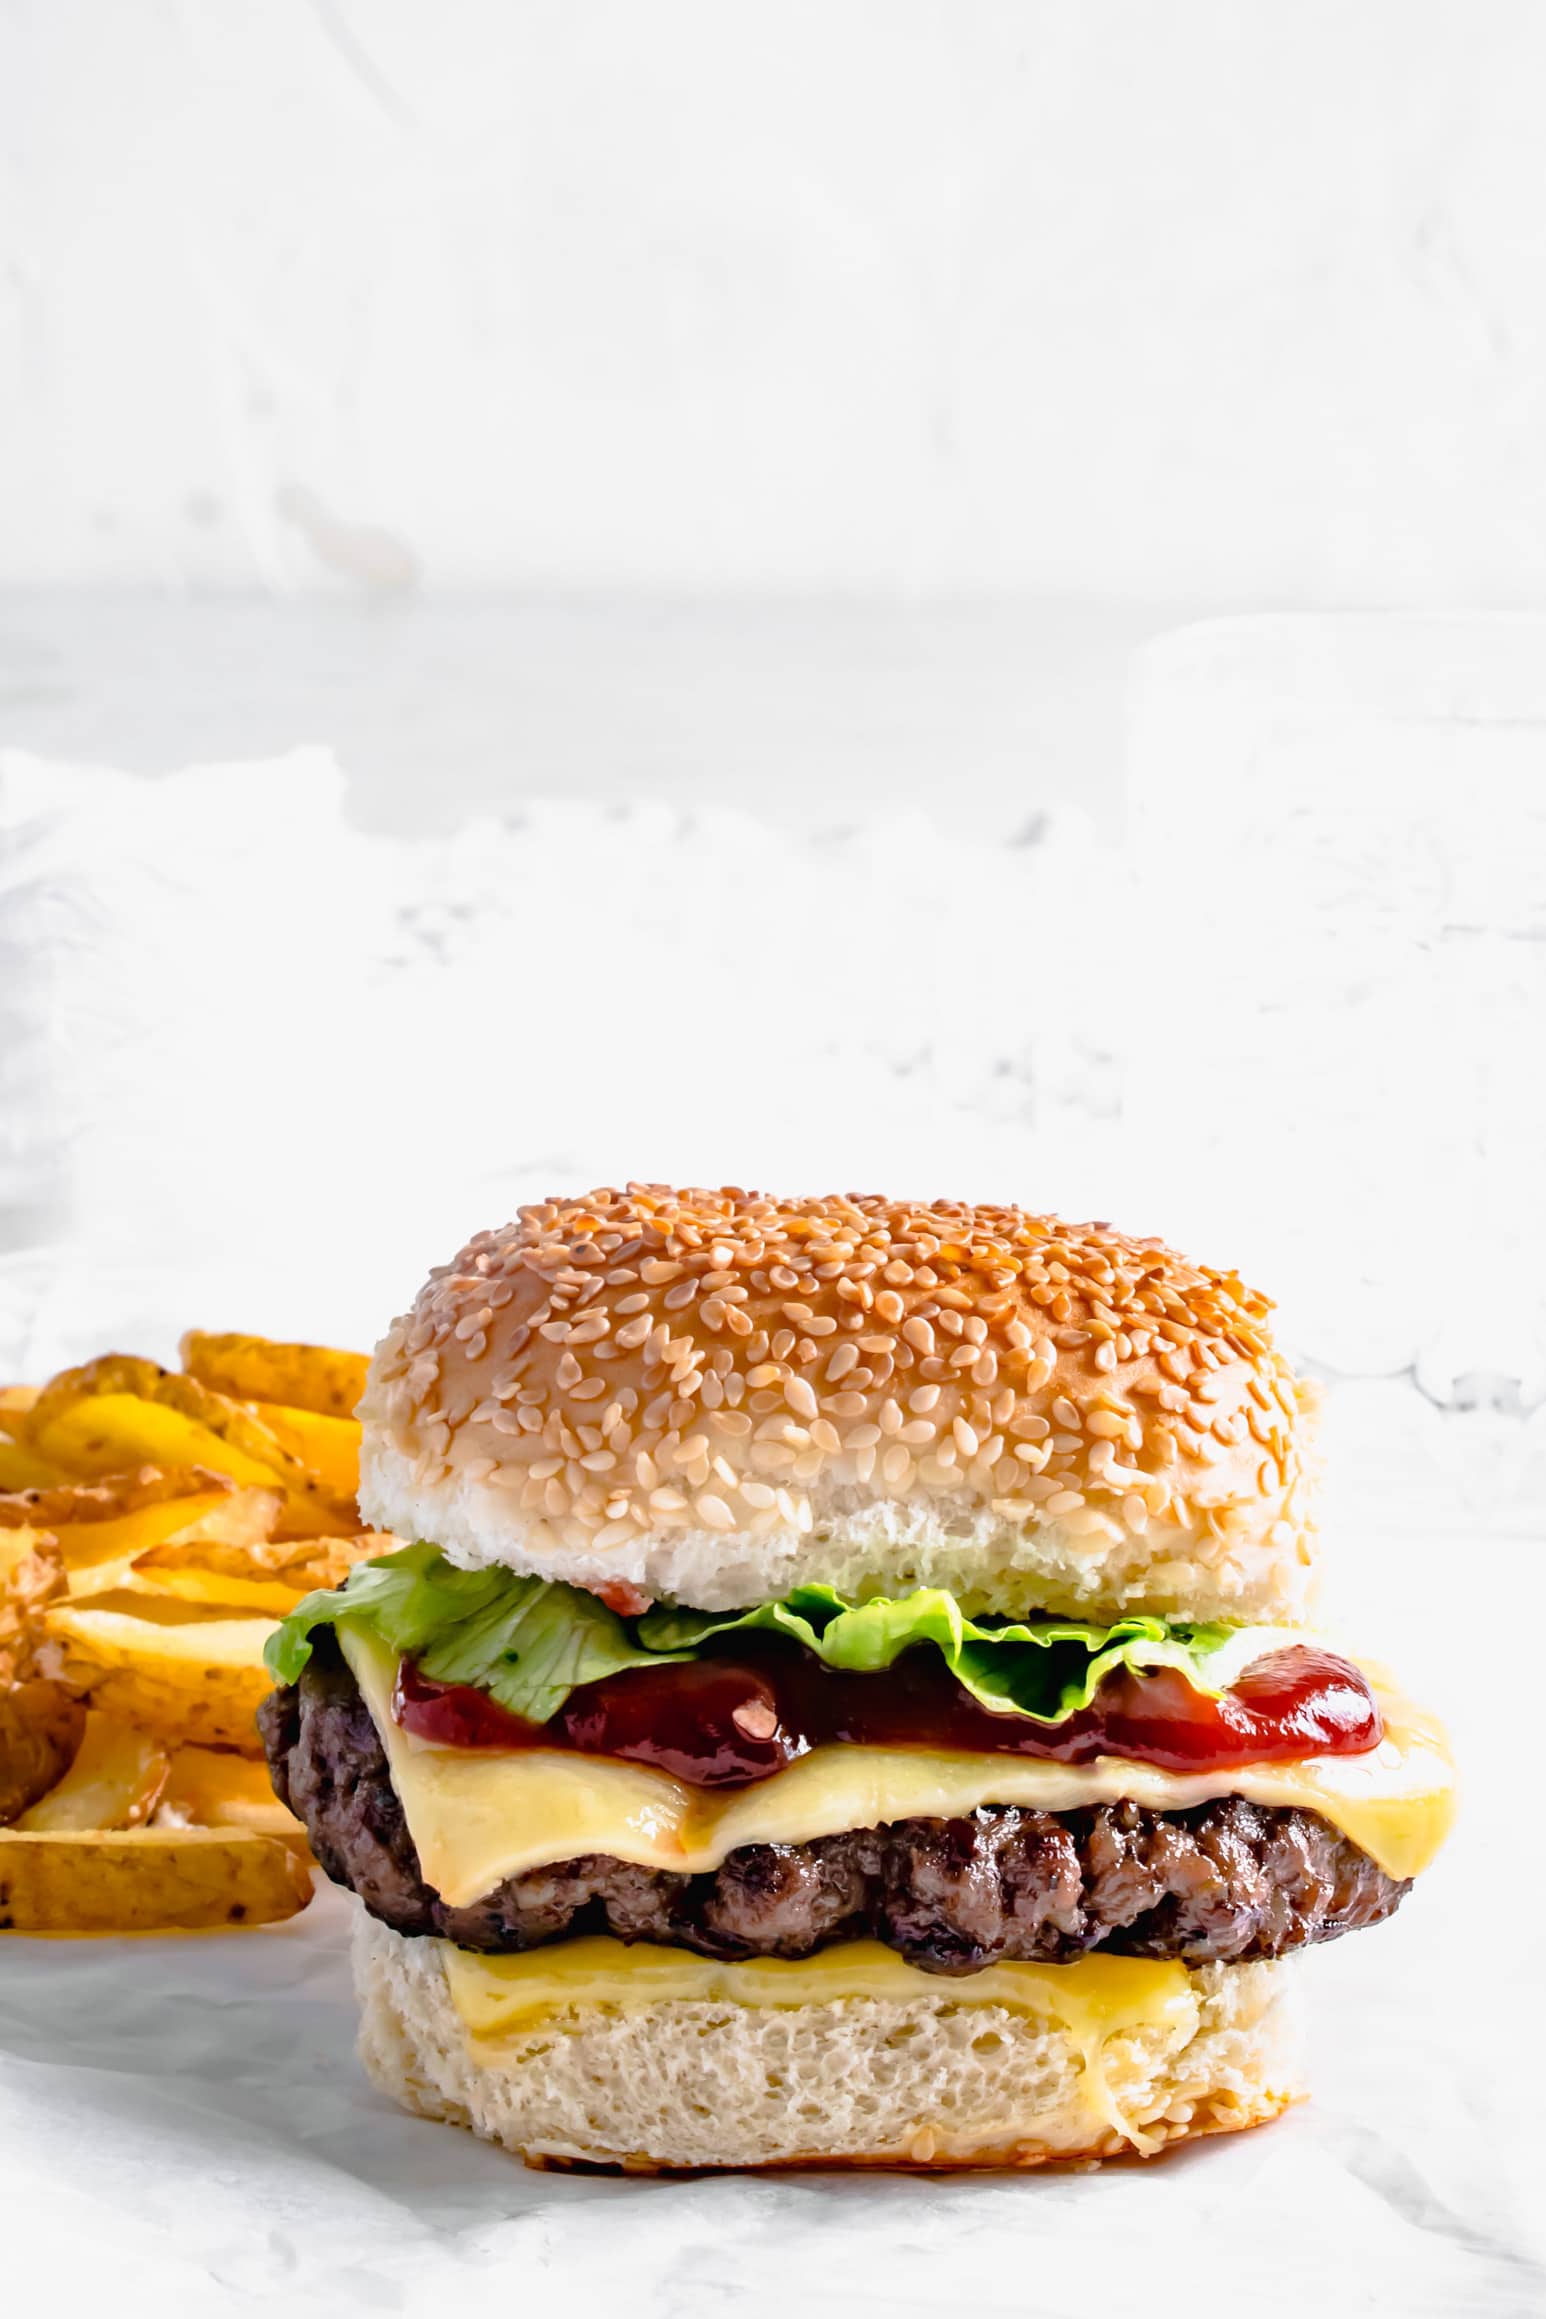 Pains burger - Recette i-Cook'in